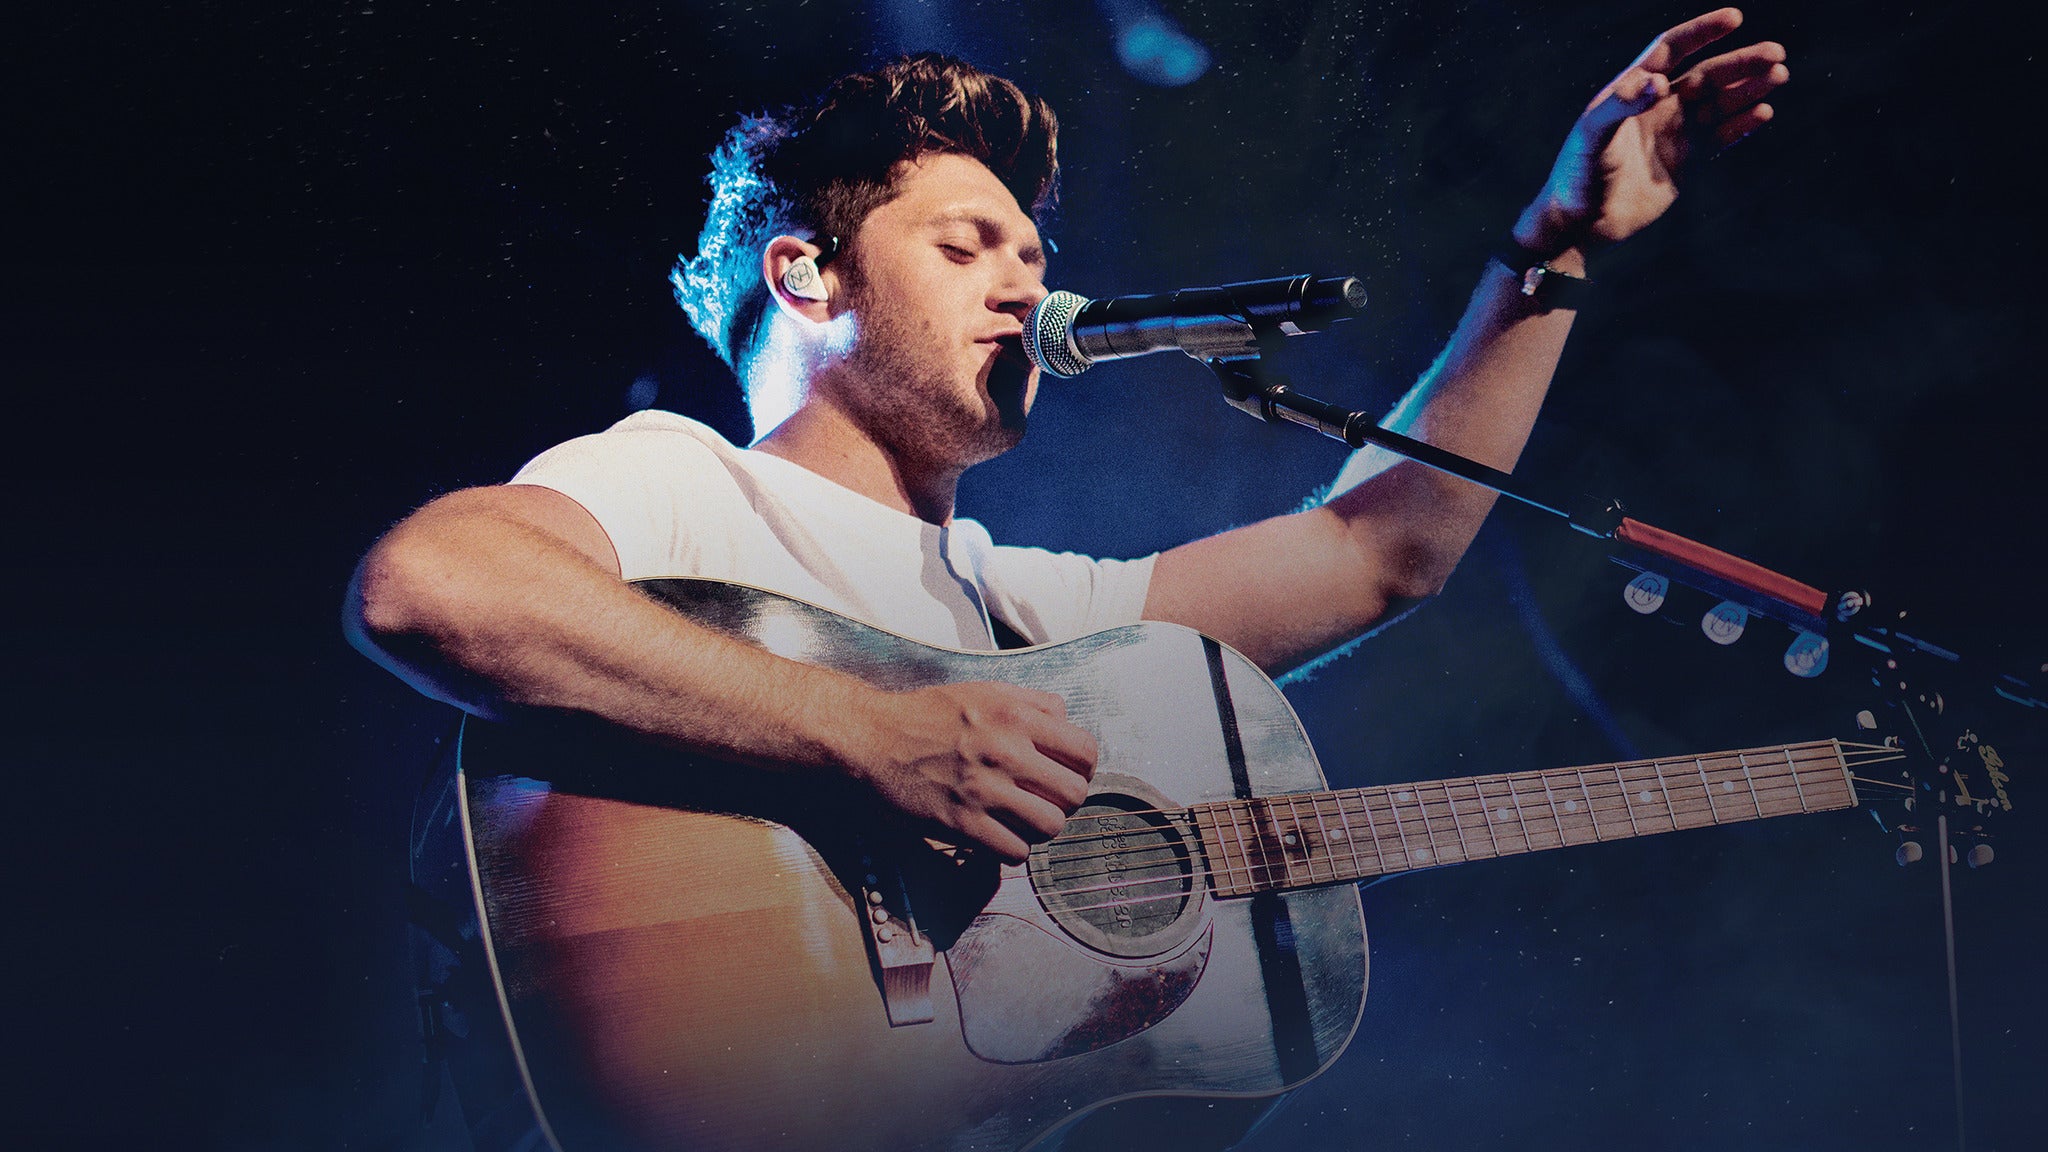 Honda Civic Tour presents Niall Horan, Nice To Meet Ya in Orange Beach promo photo for Official Platinum Onsale presale offer code